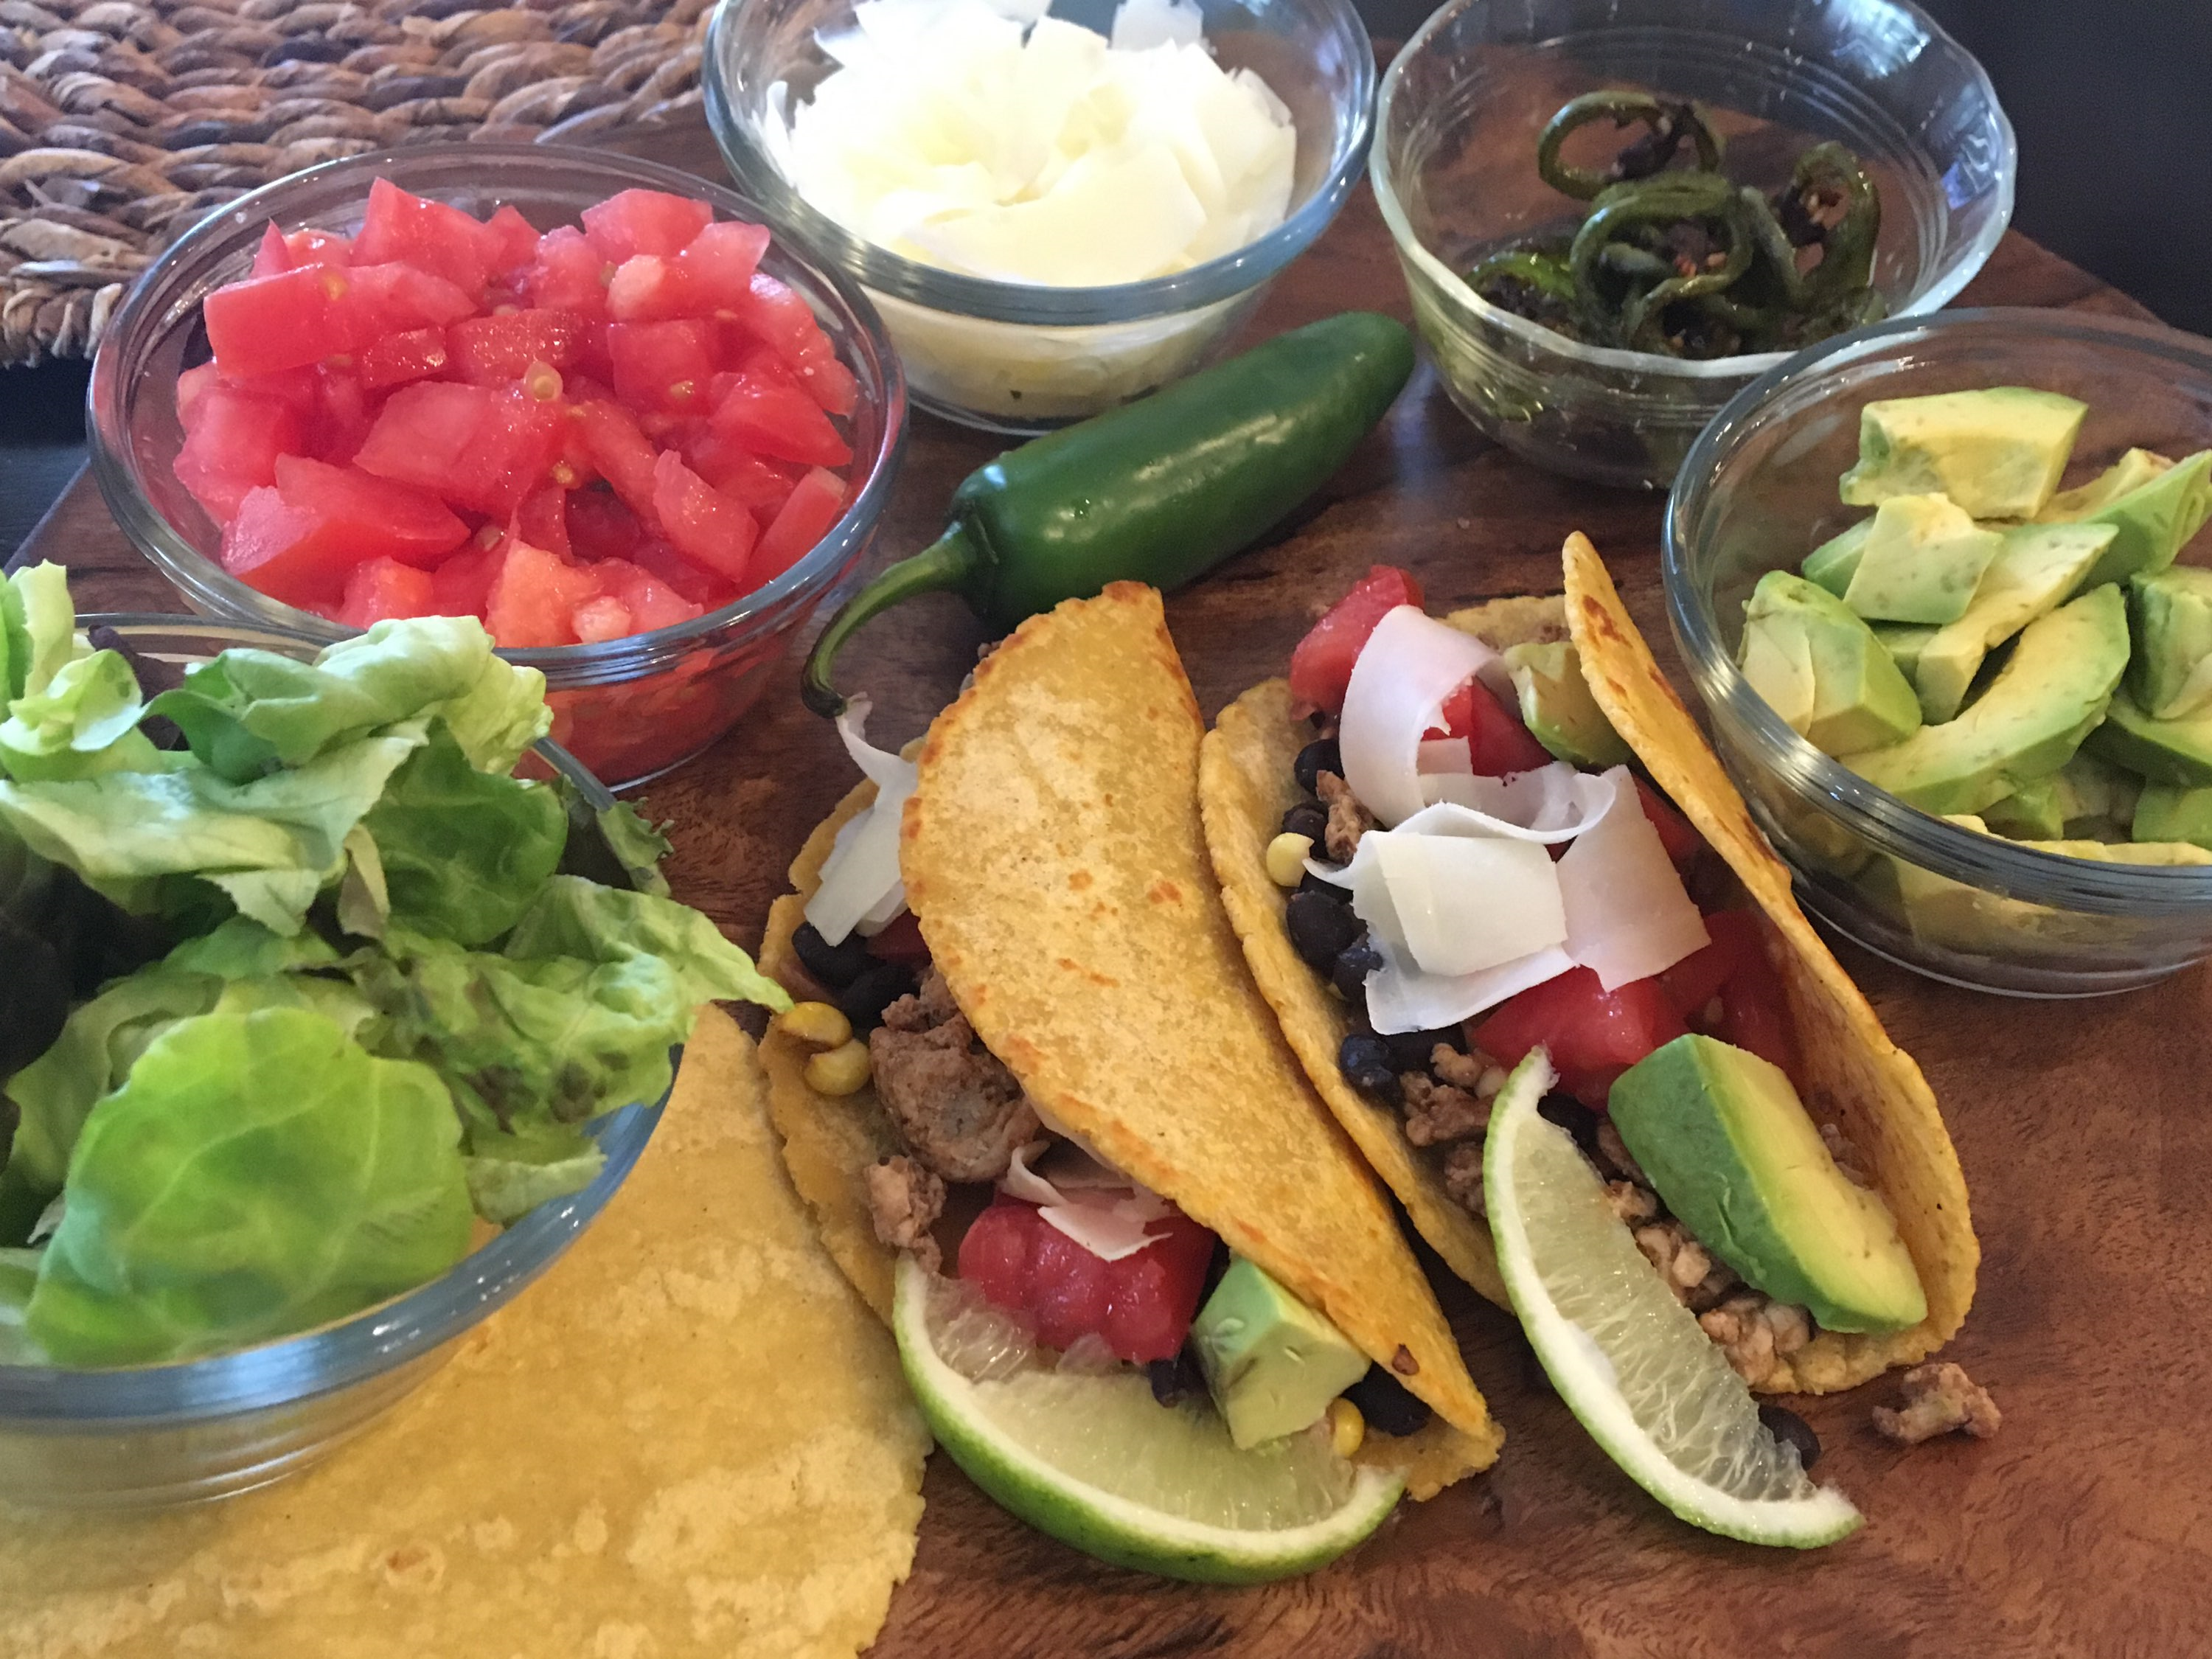 Building a Healthy Taco Using Local Produce